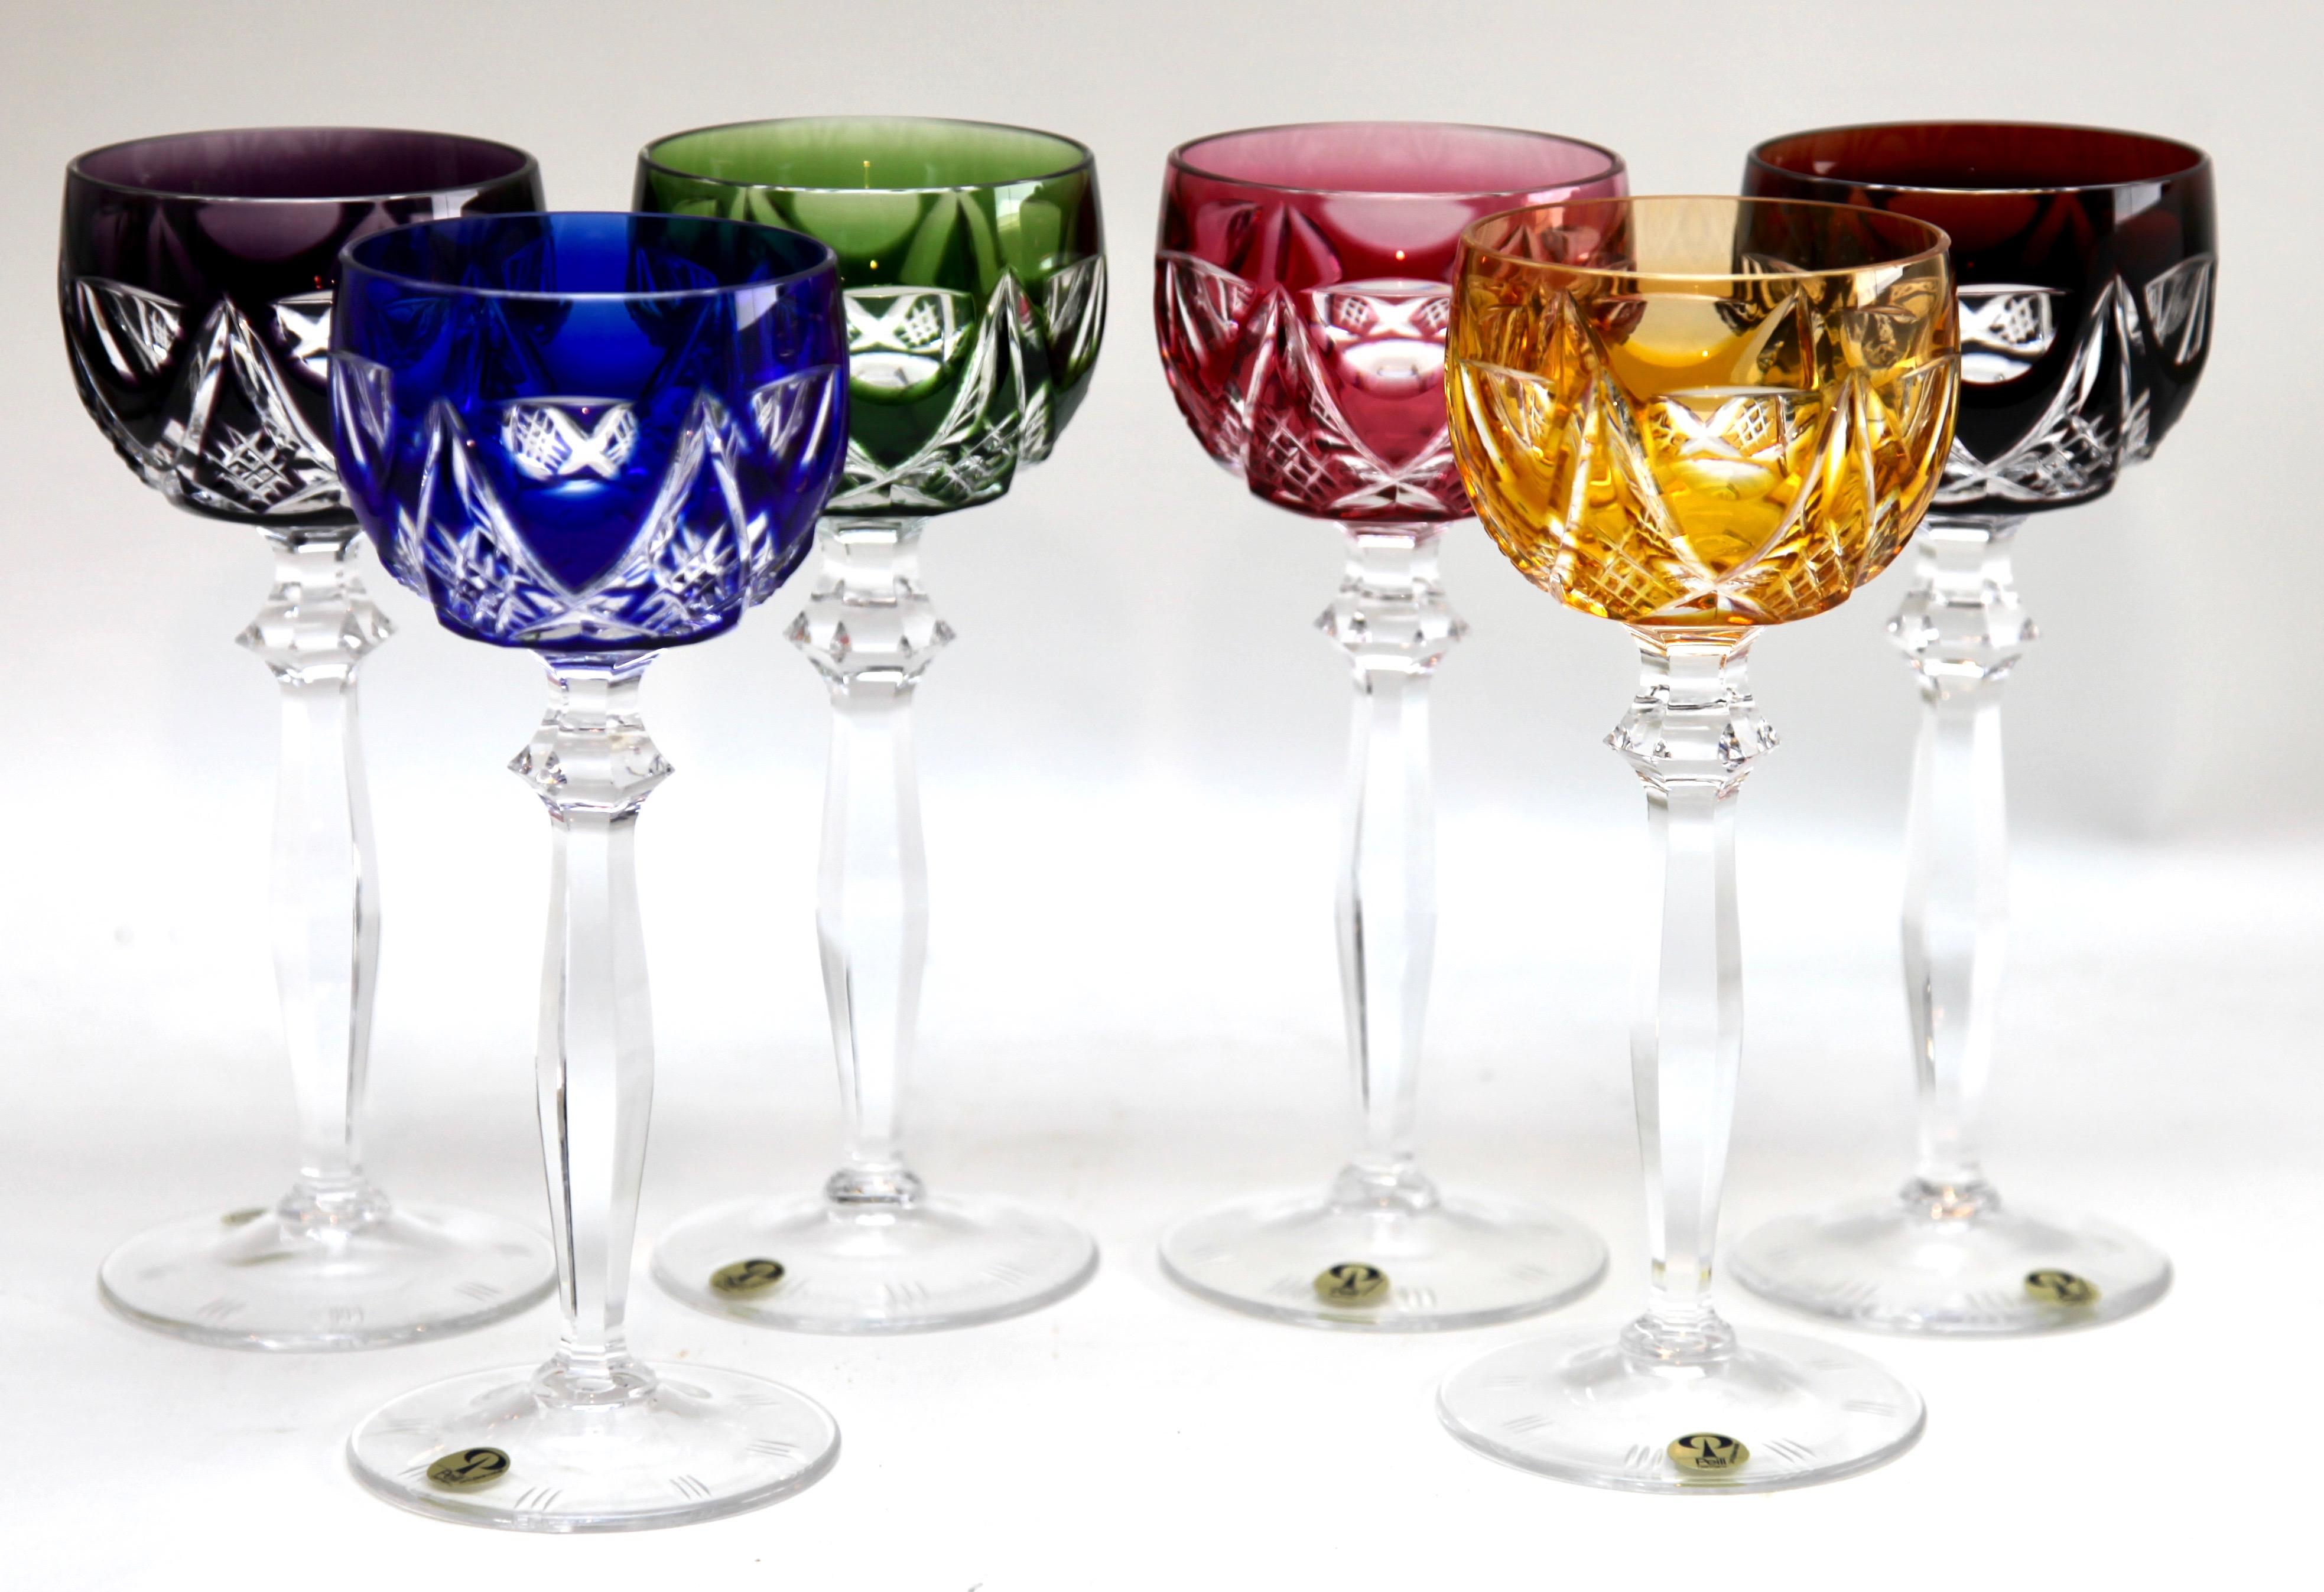 Vintage Peill & Putzler set of 6 cut to clear crystal stem glasses.
Crystal (Bleikristall 24% Mundgeblasen Handgeschliffen) glasses

Clear demi crystal glass. Side facetted and toothed stem. The bowl with colored overlay cut to clear. 
In best